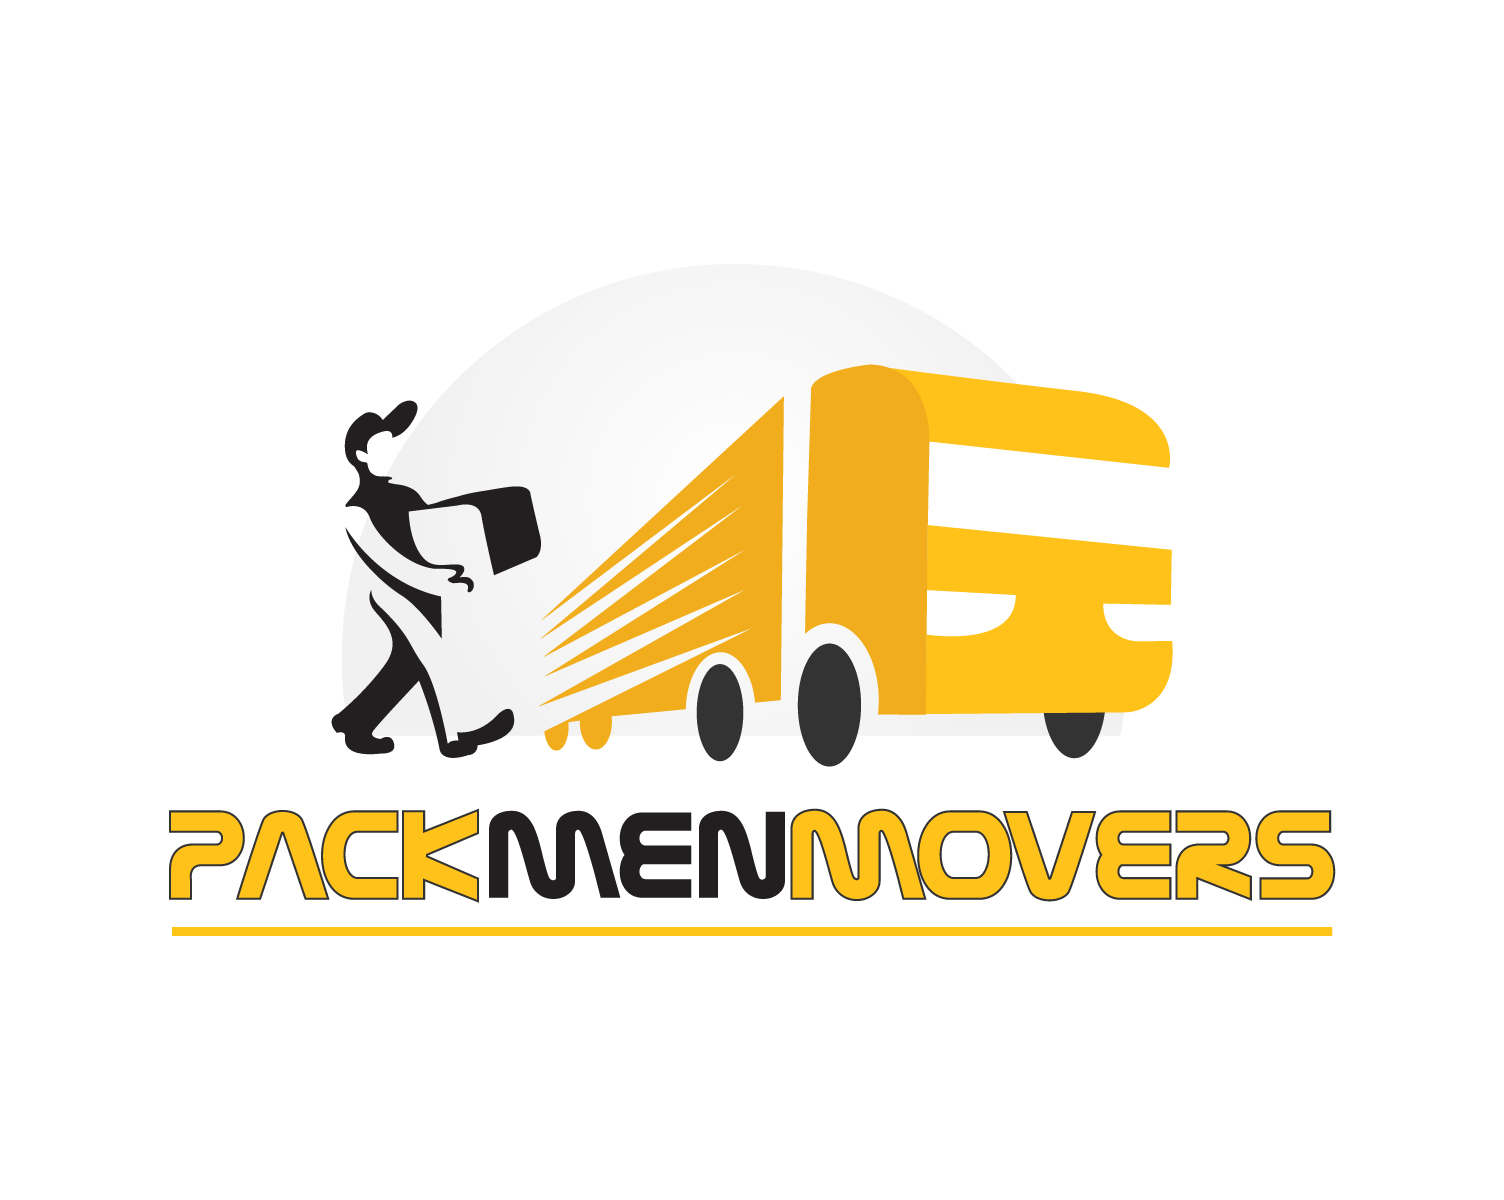 PACK-MEN-MOVERS_final-01